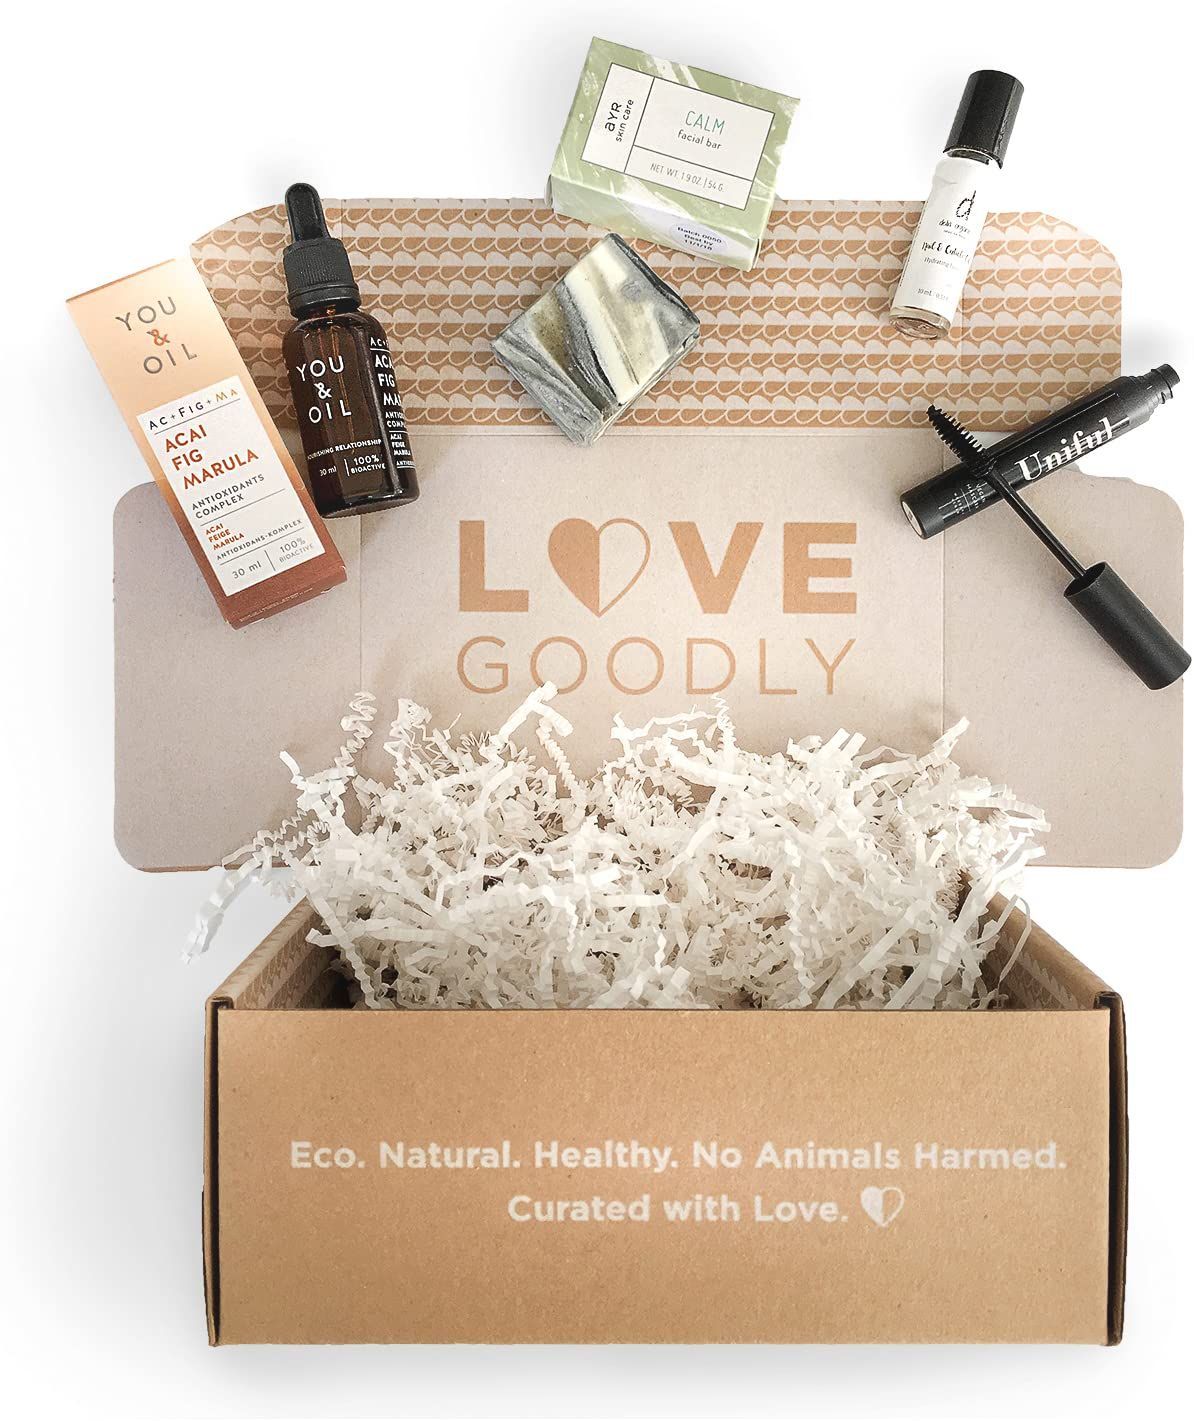 10 Luxury Beauty Subscription Boxes on Amazon for Mother's Day -   19 organic beauty Box ideas